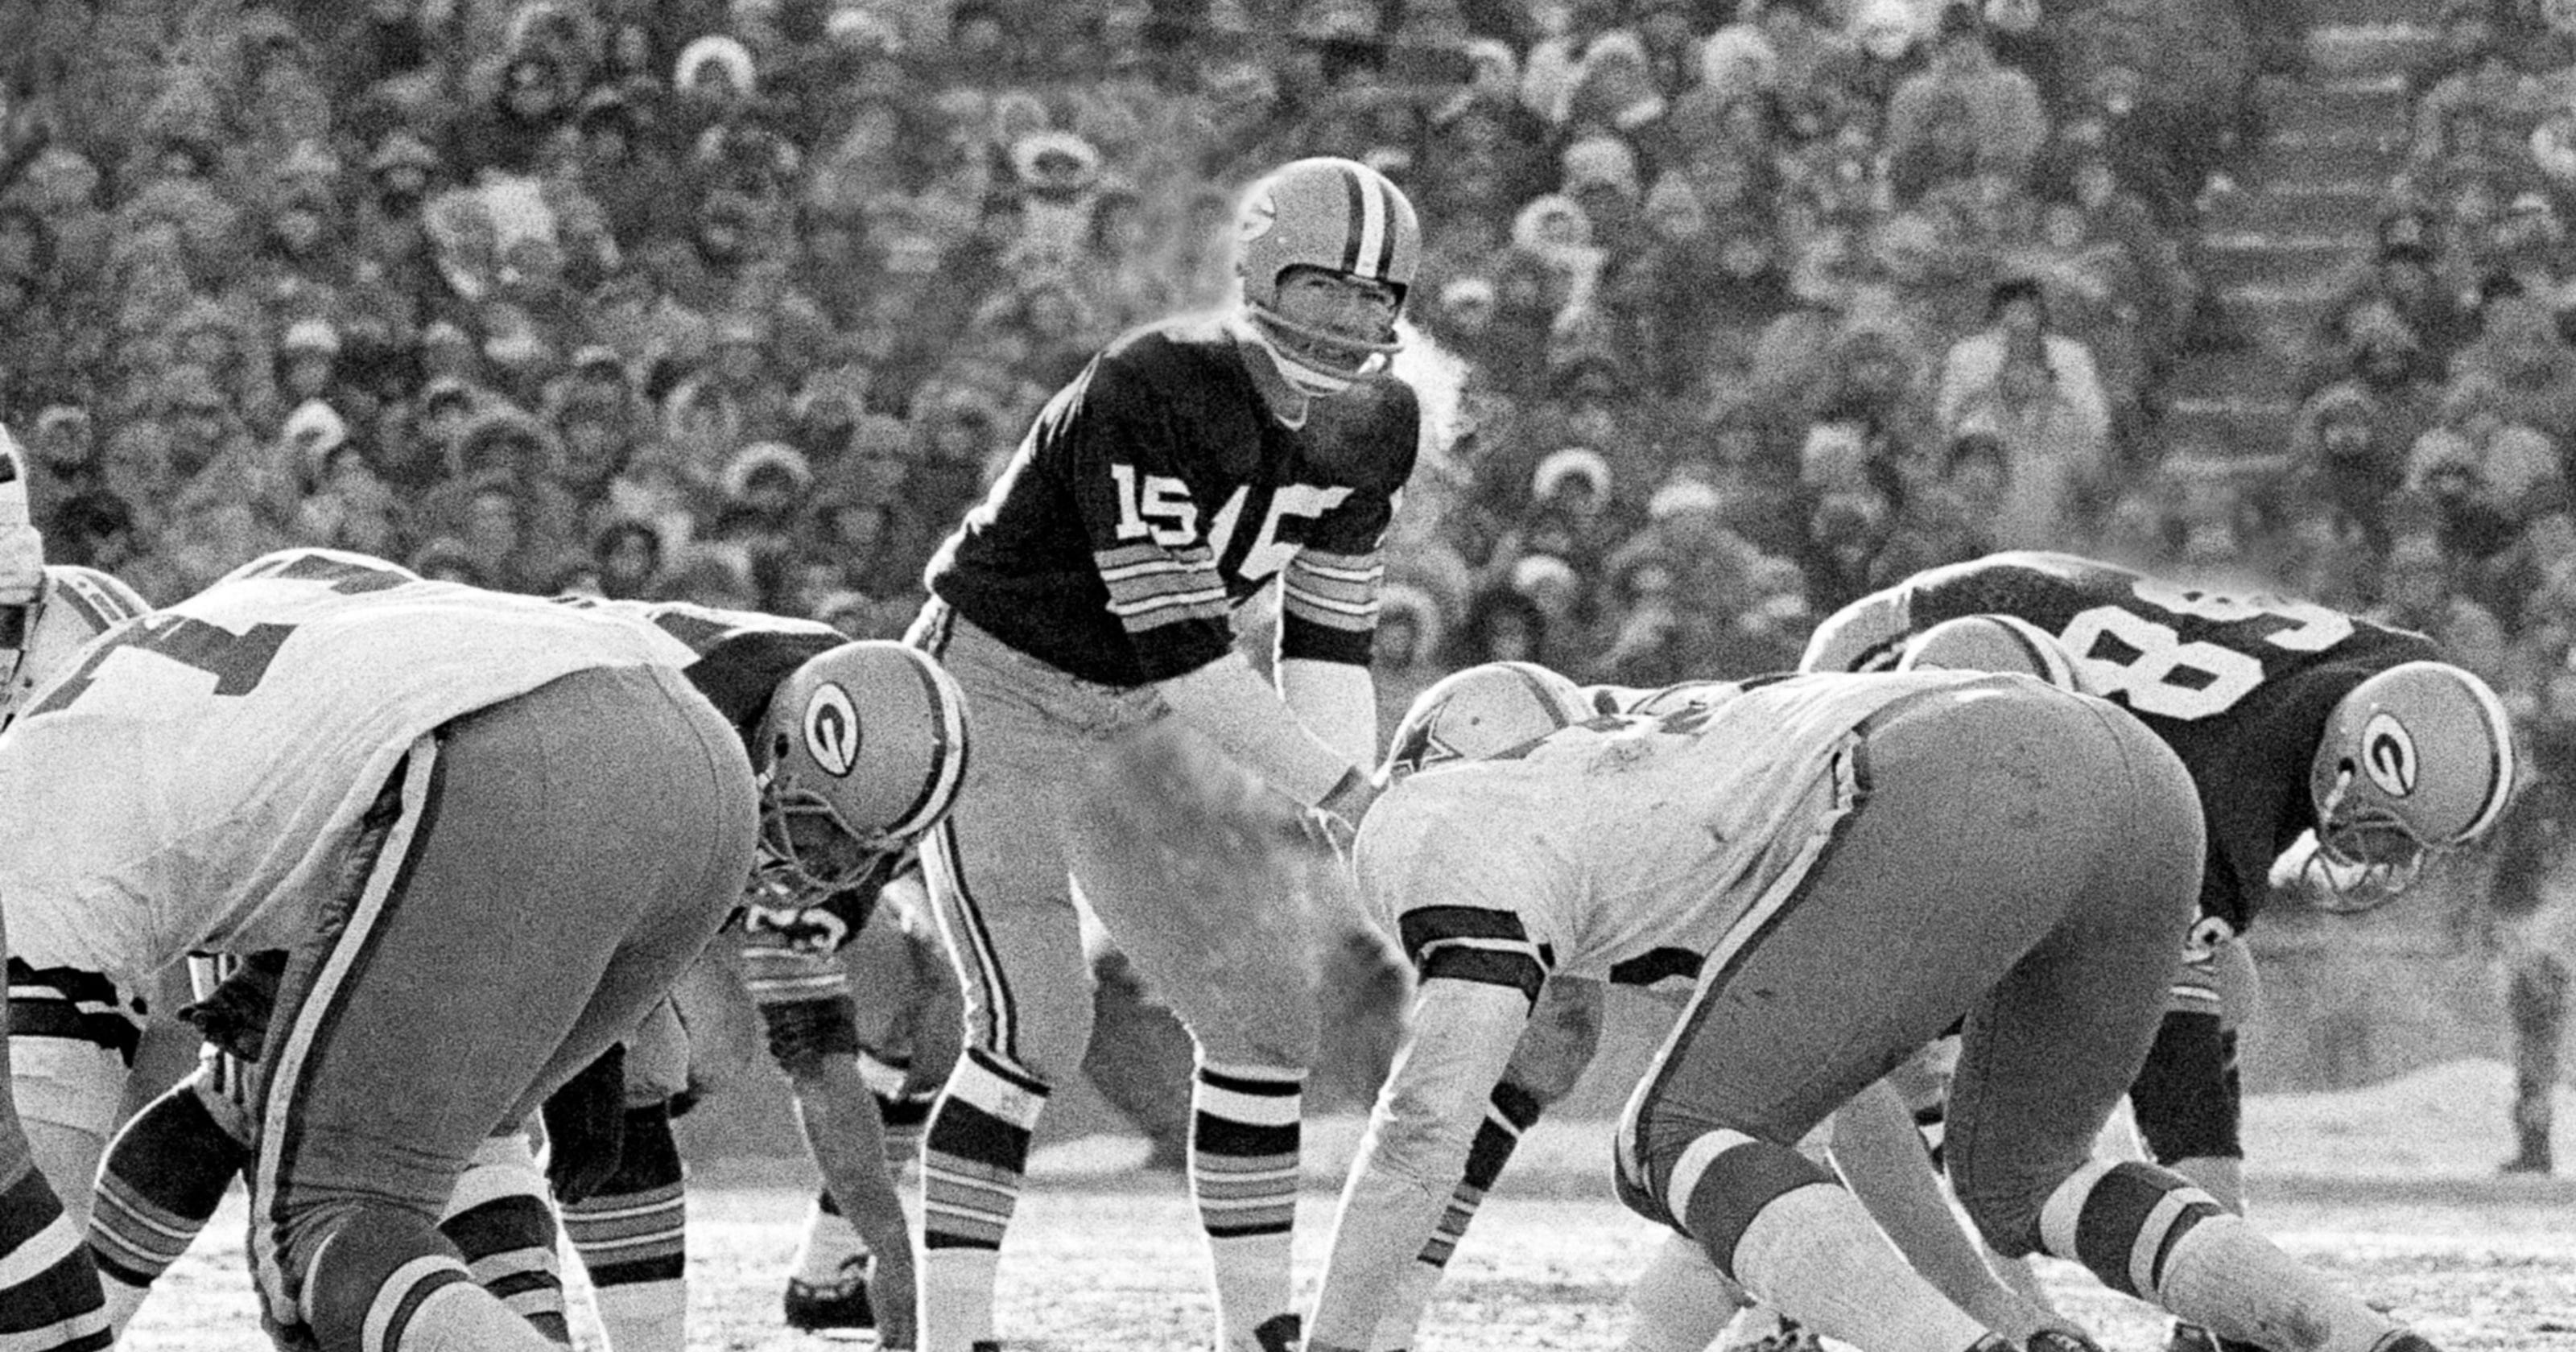 The untold story of the Ice Bowl's first touchdown